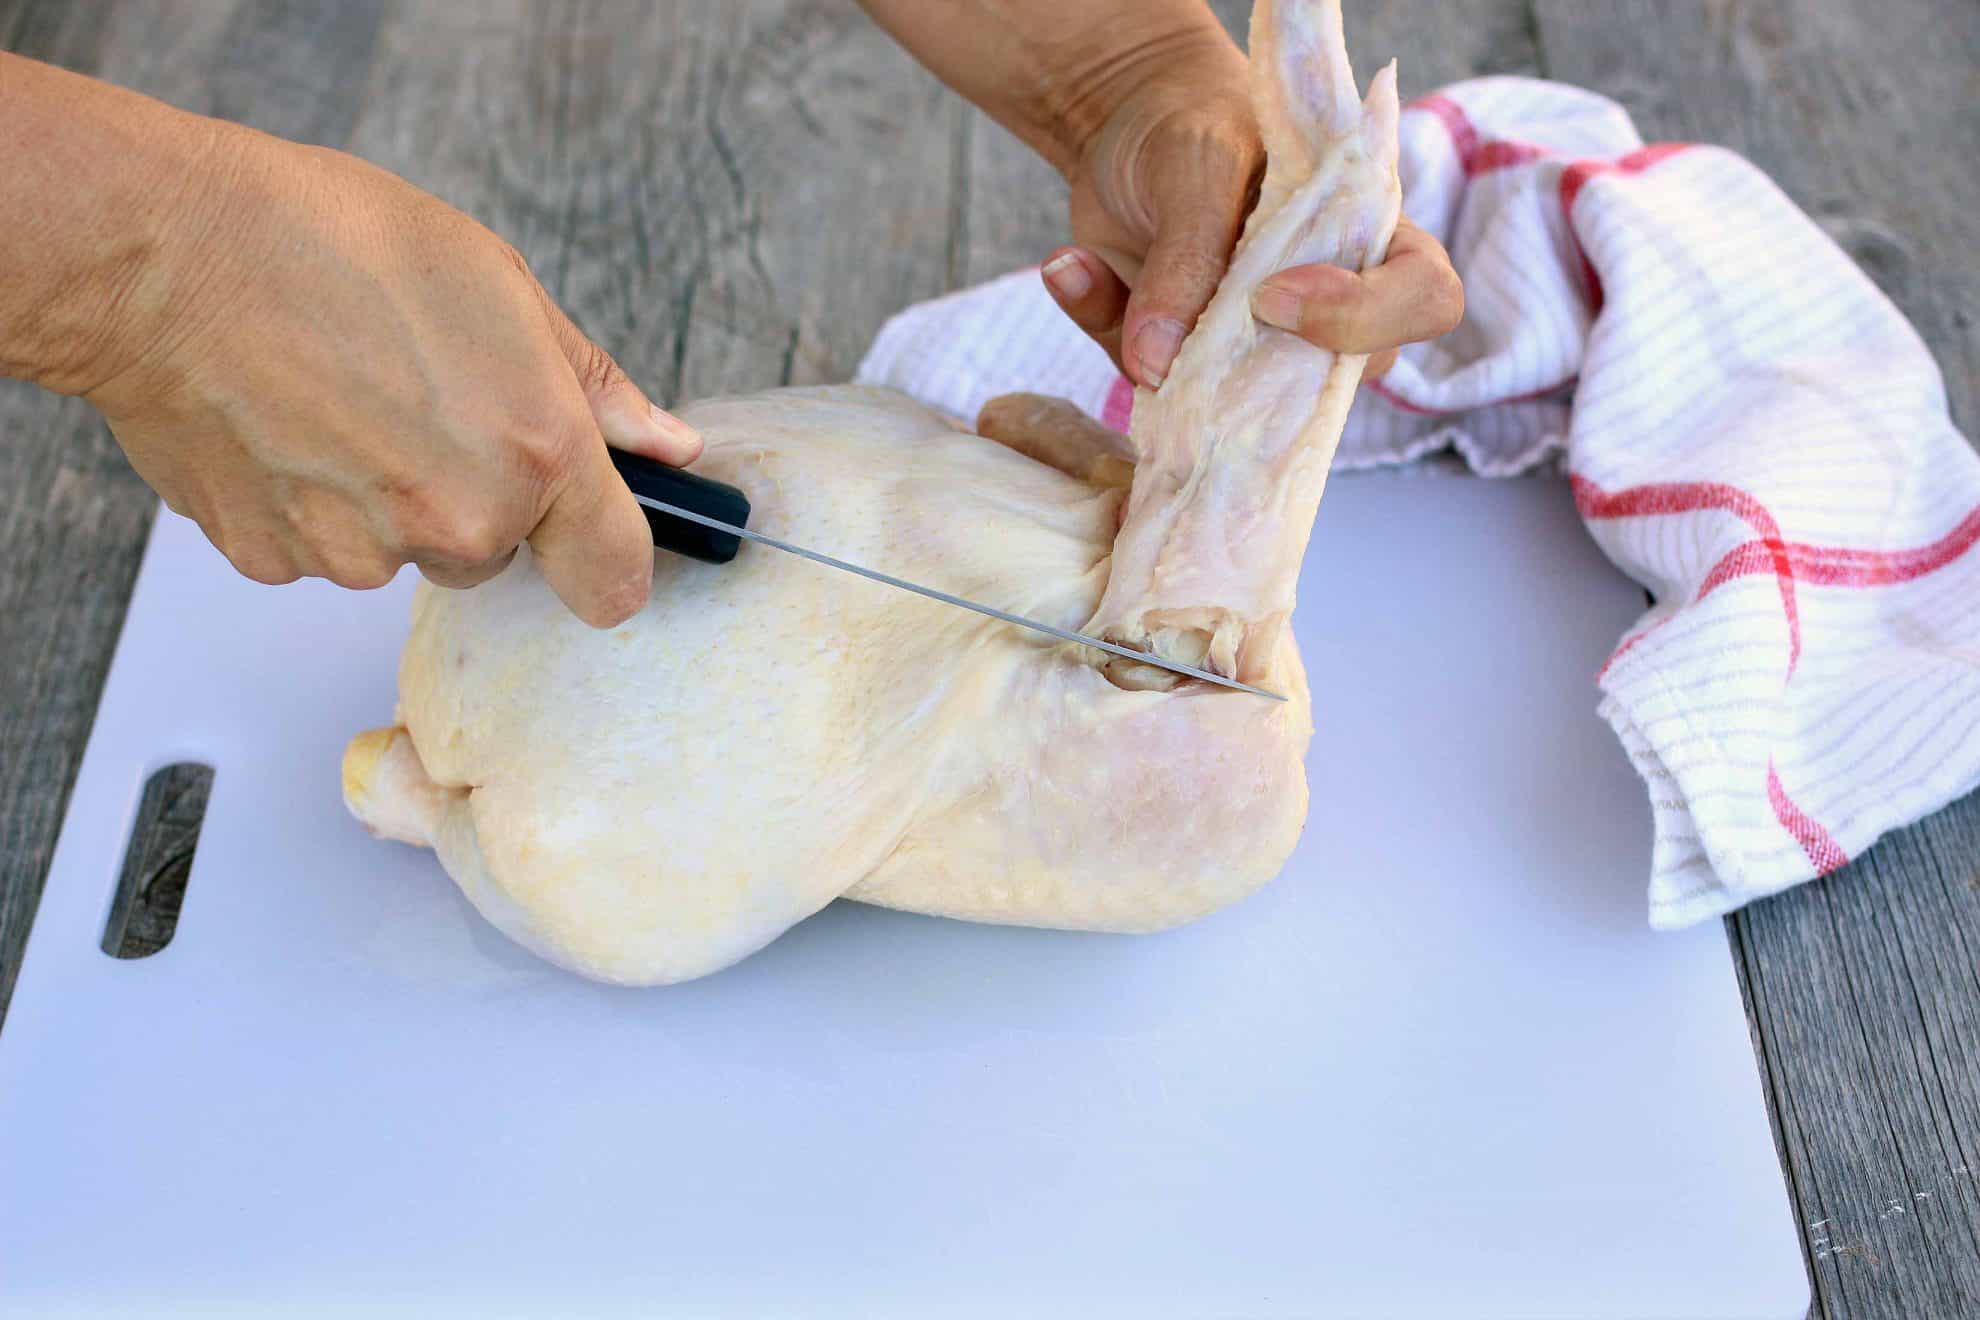 Separating the leg from the thigh of a whole chicken.